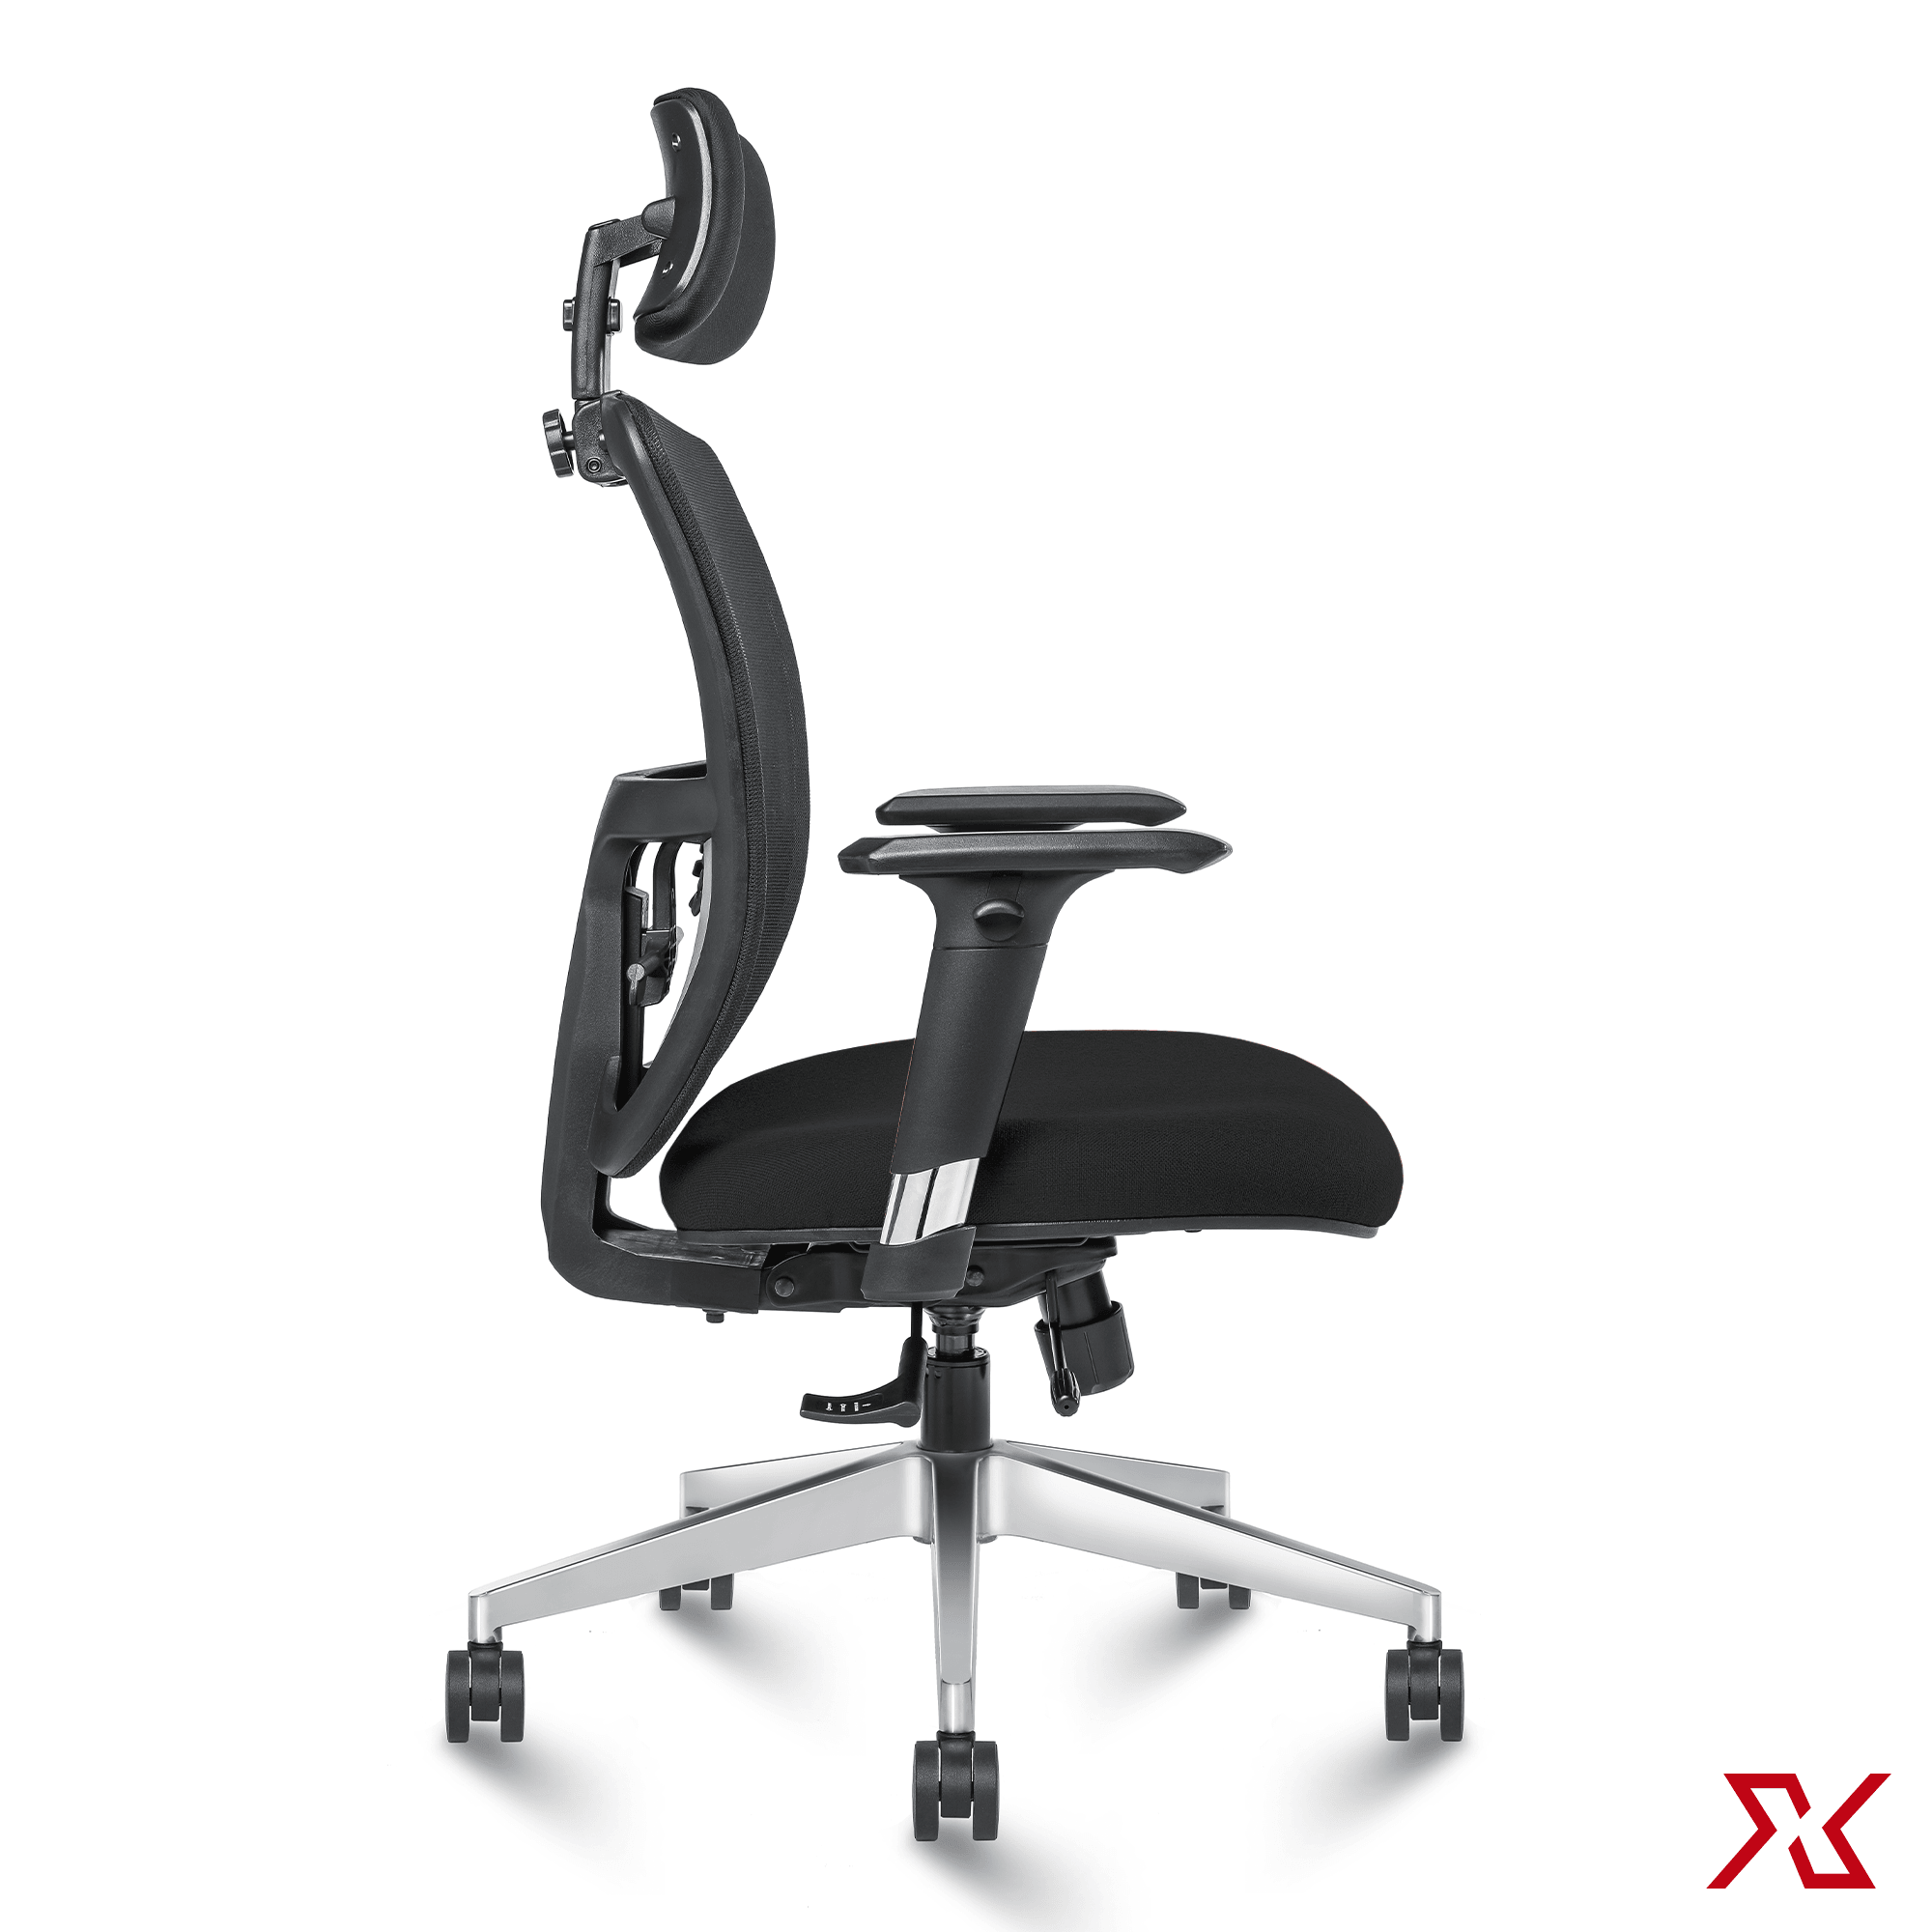 STORM High Back Max (Black Chair) - Exclusiff Seating Sytems